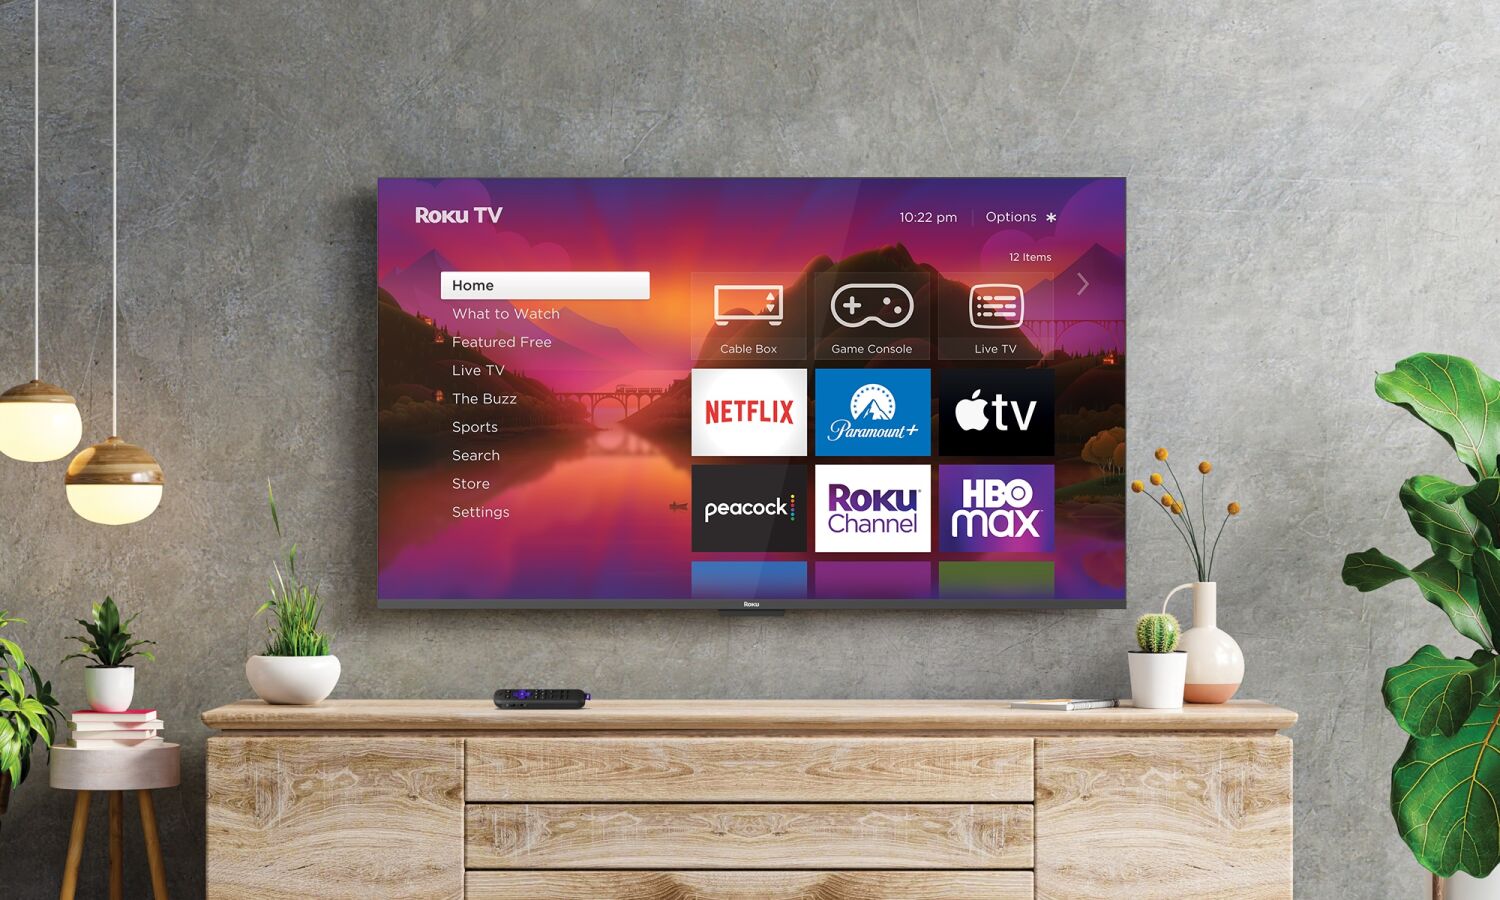 Roku TVs are coming to market. Will they help the San Jose streamer rebound?